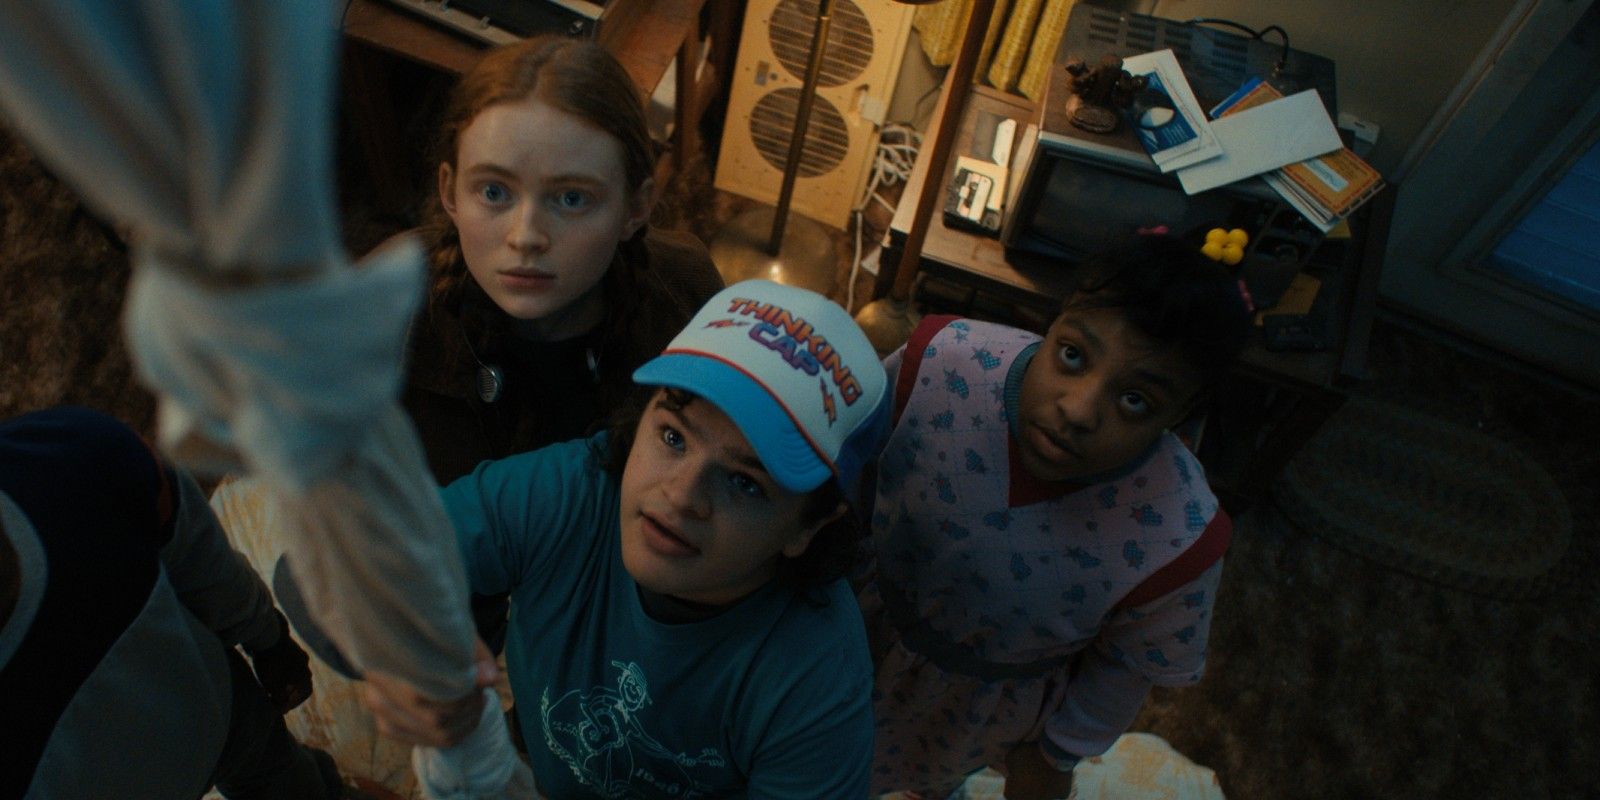 Max, Dustin, and Erica in Season 4 of Stranger Things 